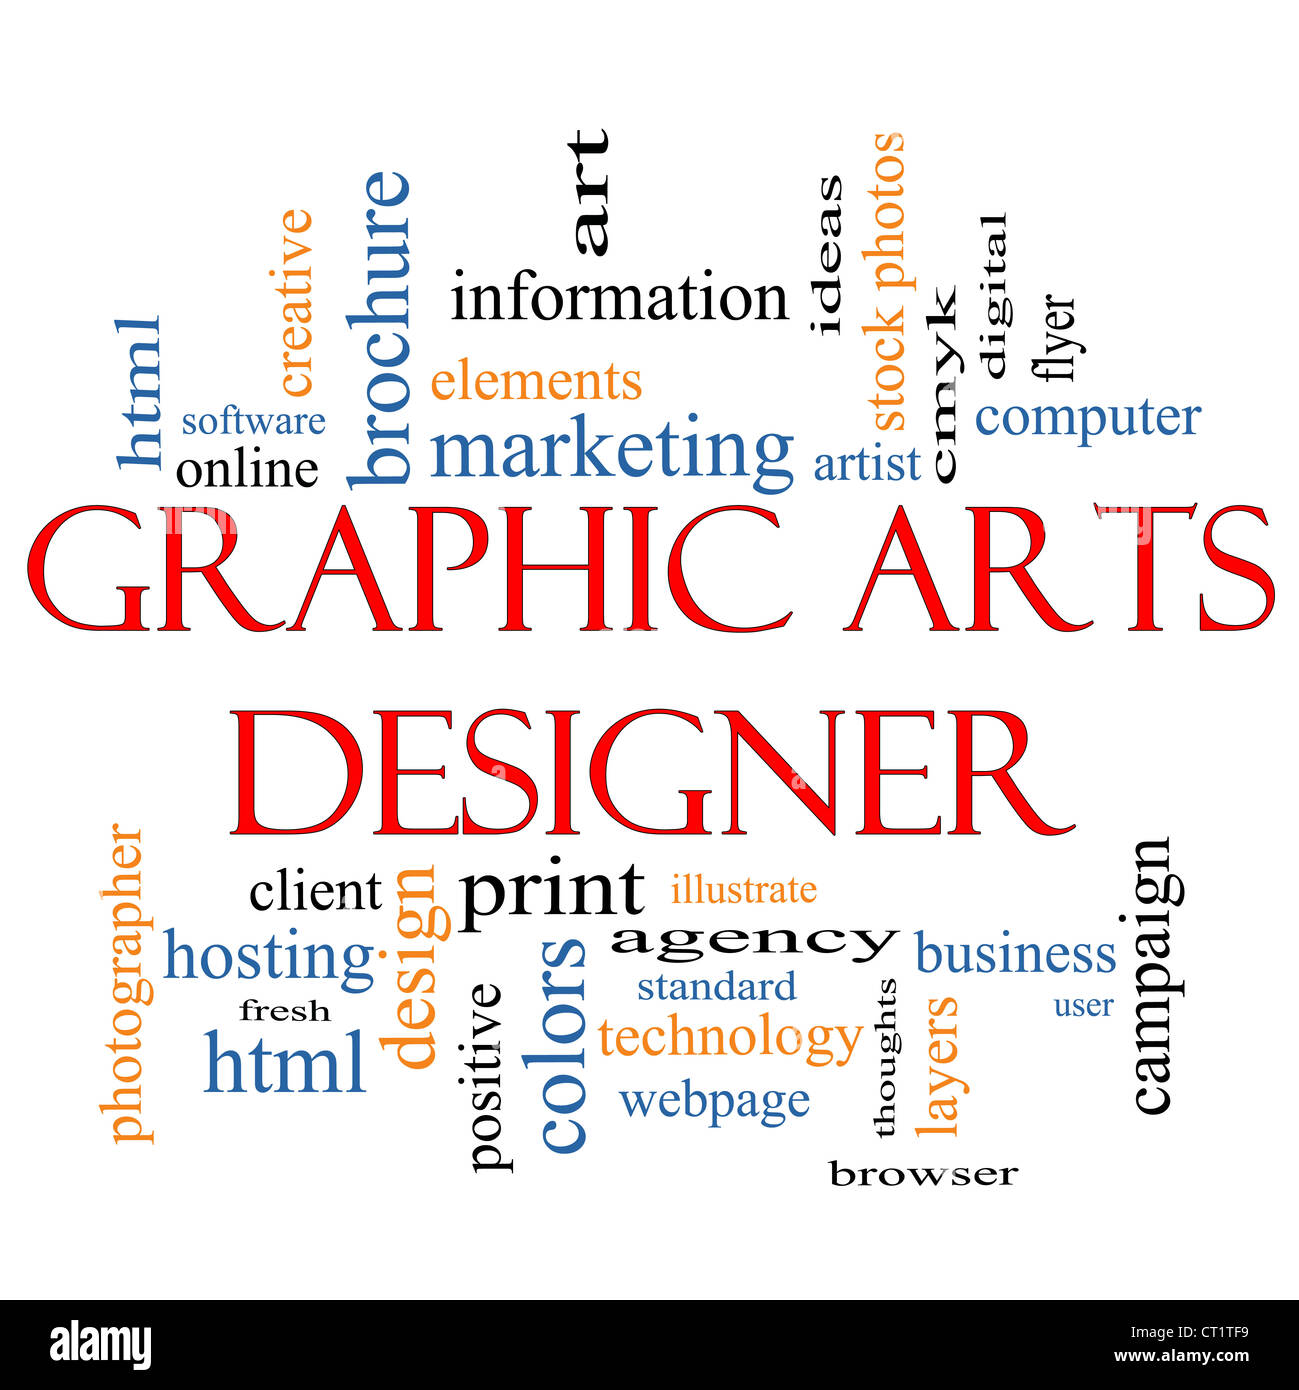 Graphic Arts Designer Word Cloud Concept with great terms such as software, html, client, design, illustrate and more Stock Photo